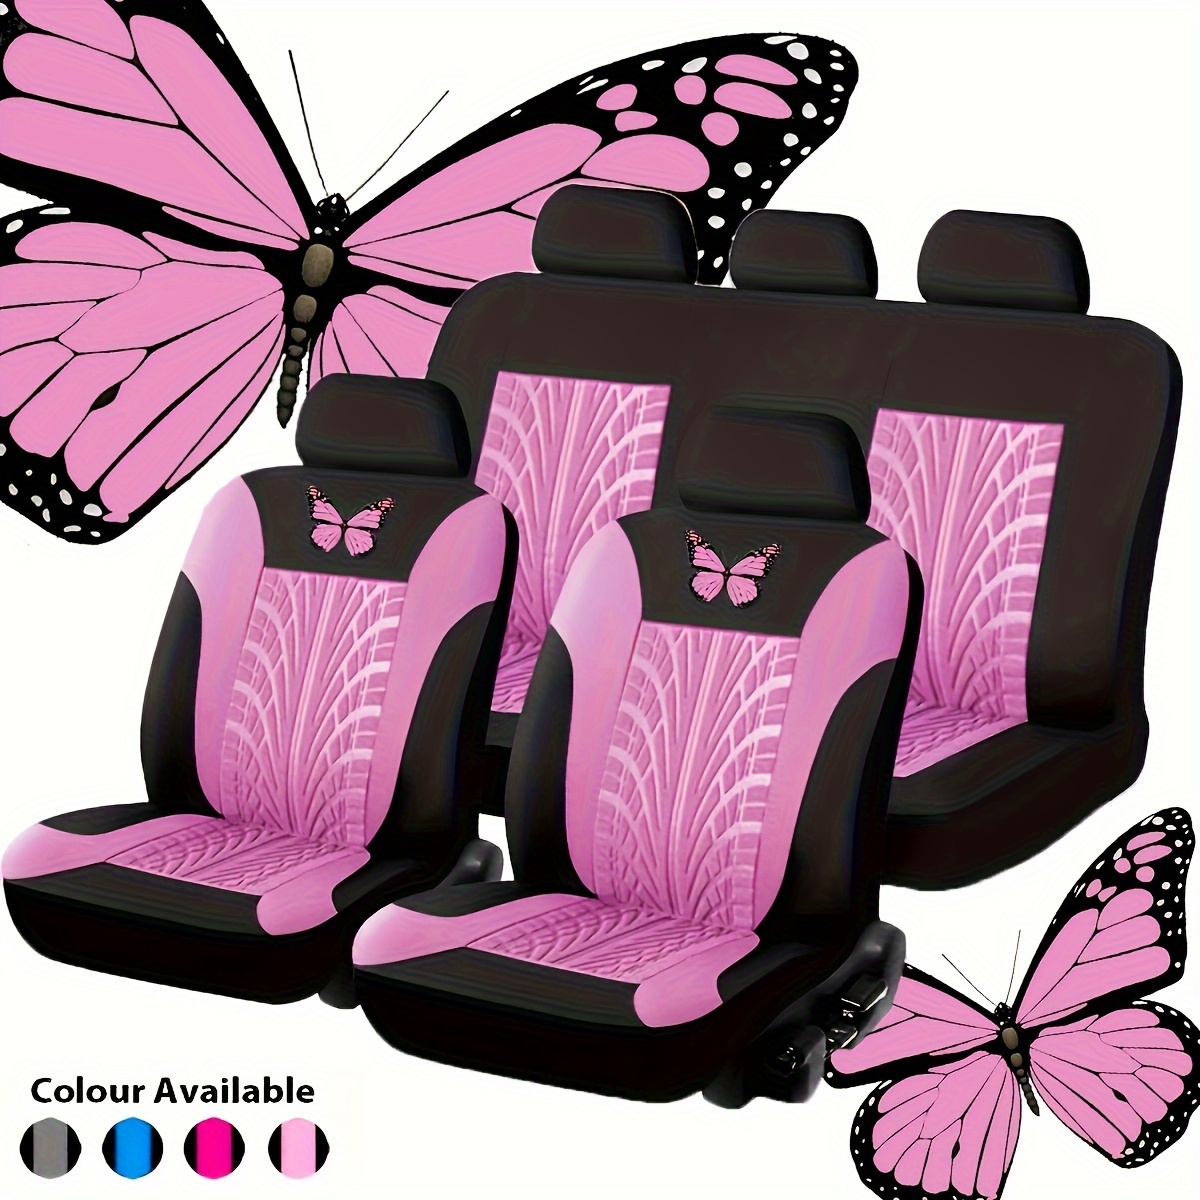 

Pink Butterfly Press Machine Seat Cover With Car Seat Cover Hot Stamping Process, 5-seater Full Car Set Of 9 Pieces